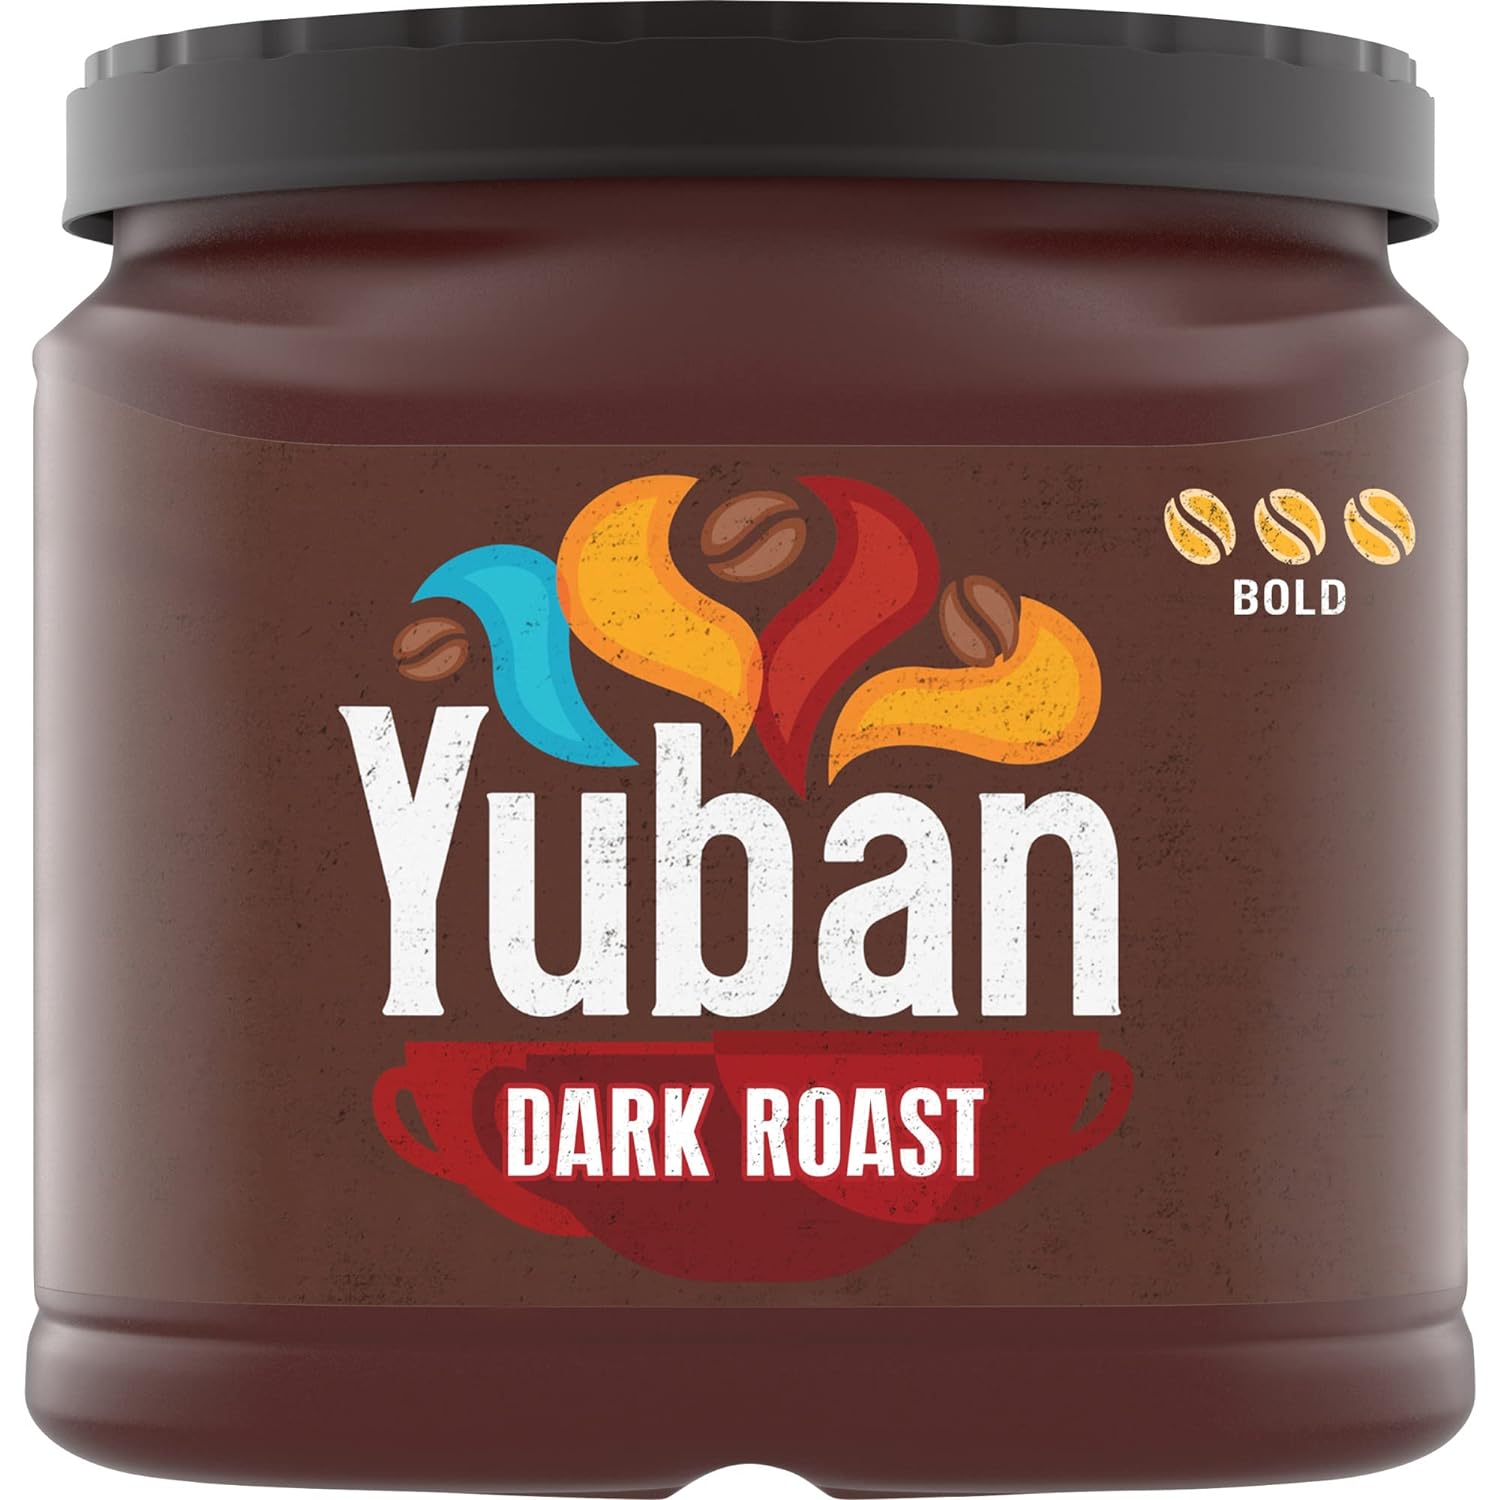 We like a robust flavor without bitterness and this coffee delivers that. Yuban is a good choice for an everyday coffee at an affordable price. We have used Yuban for many years.